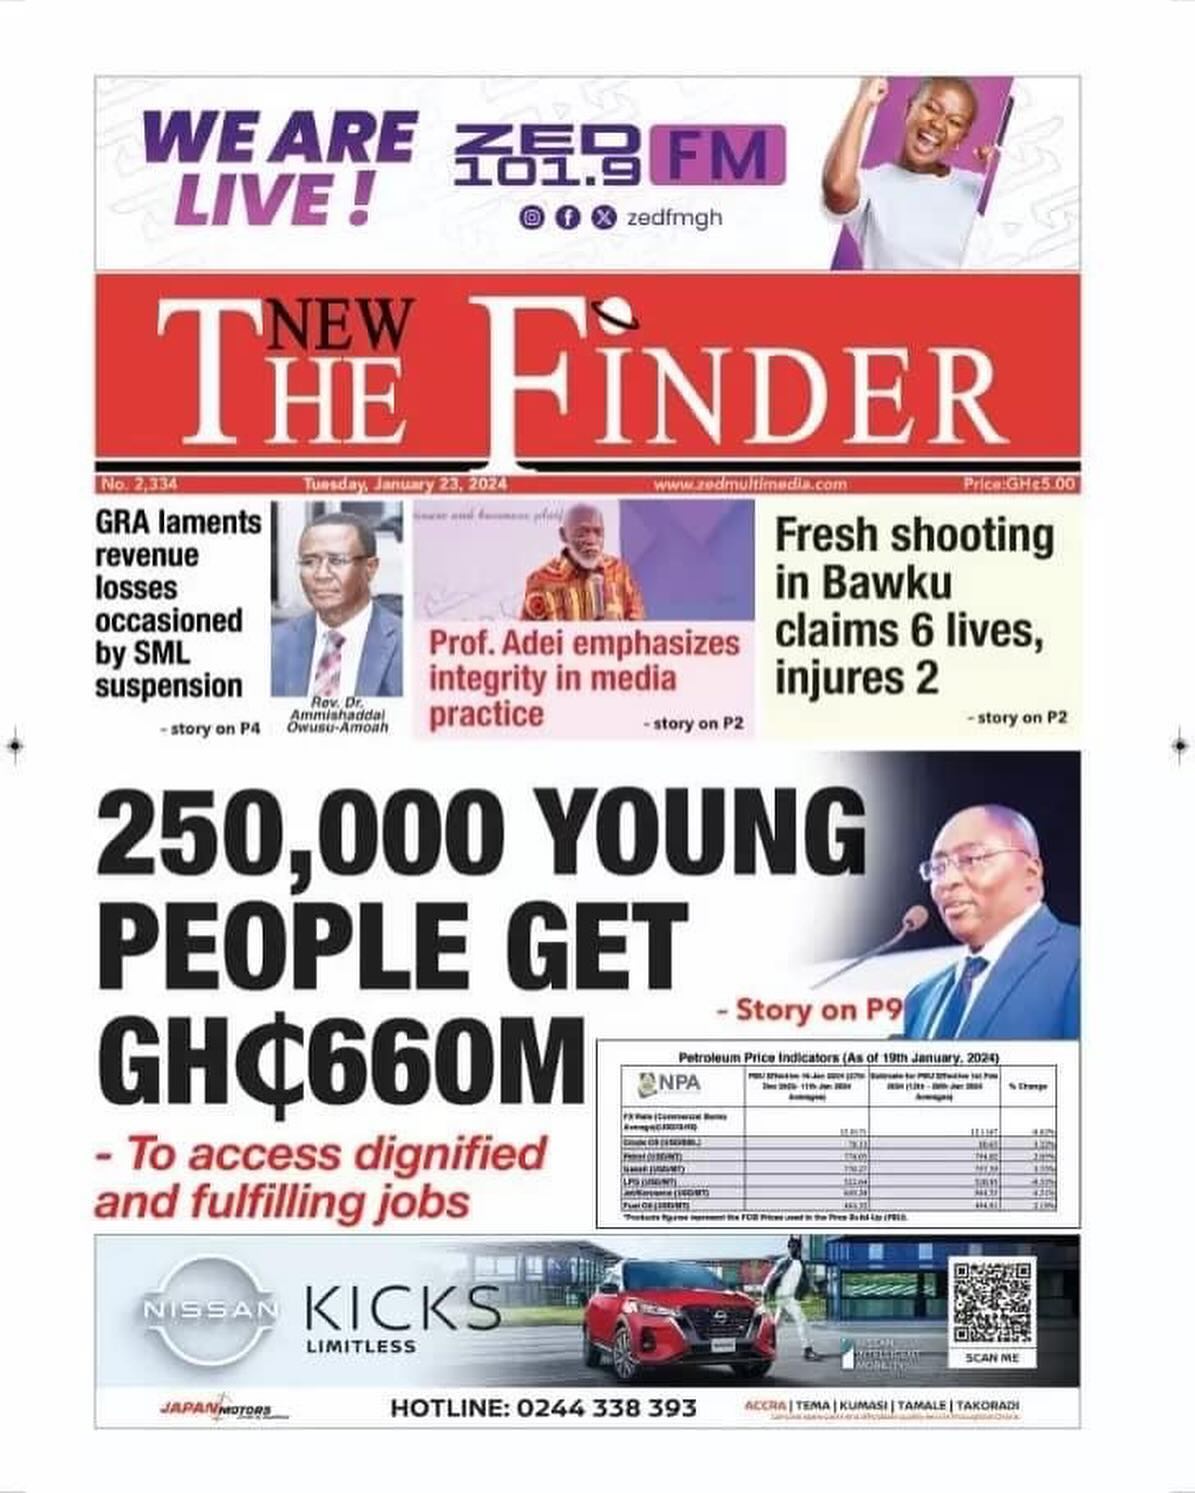 New The Finder Newspaper - January 23